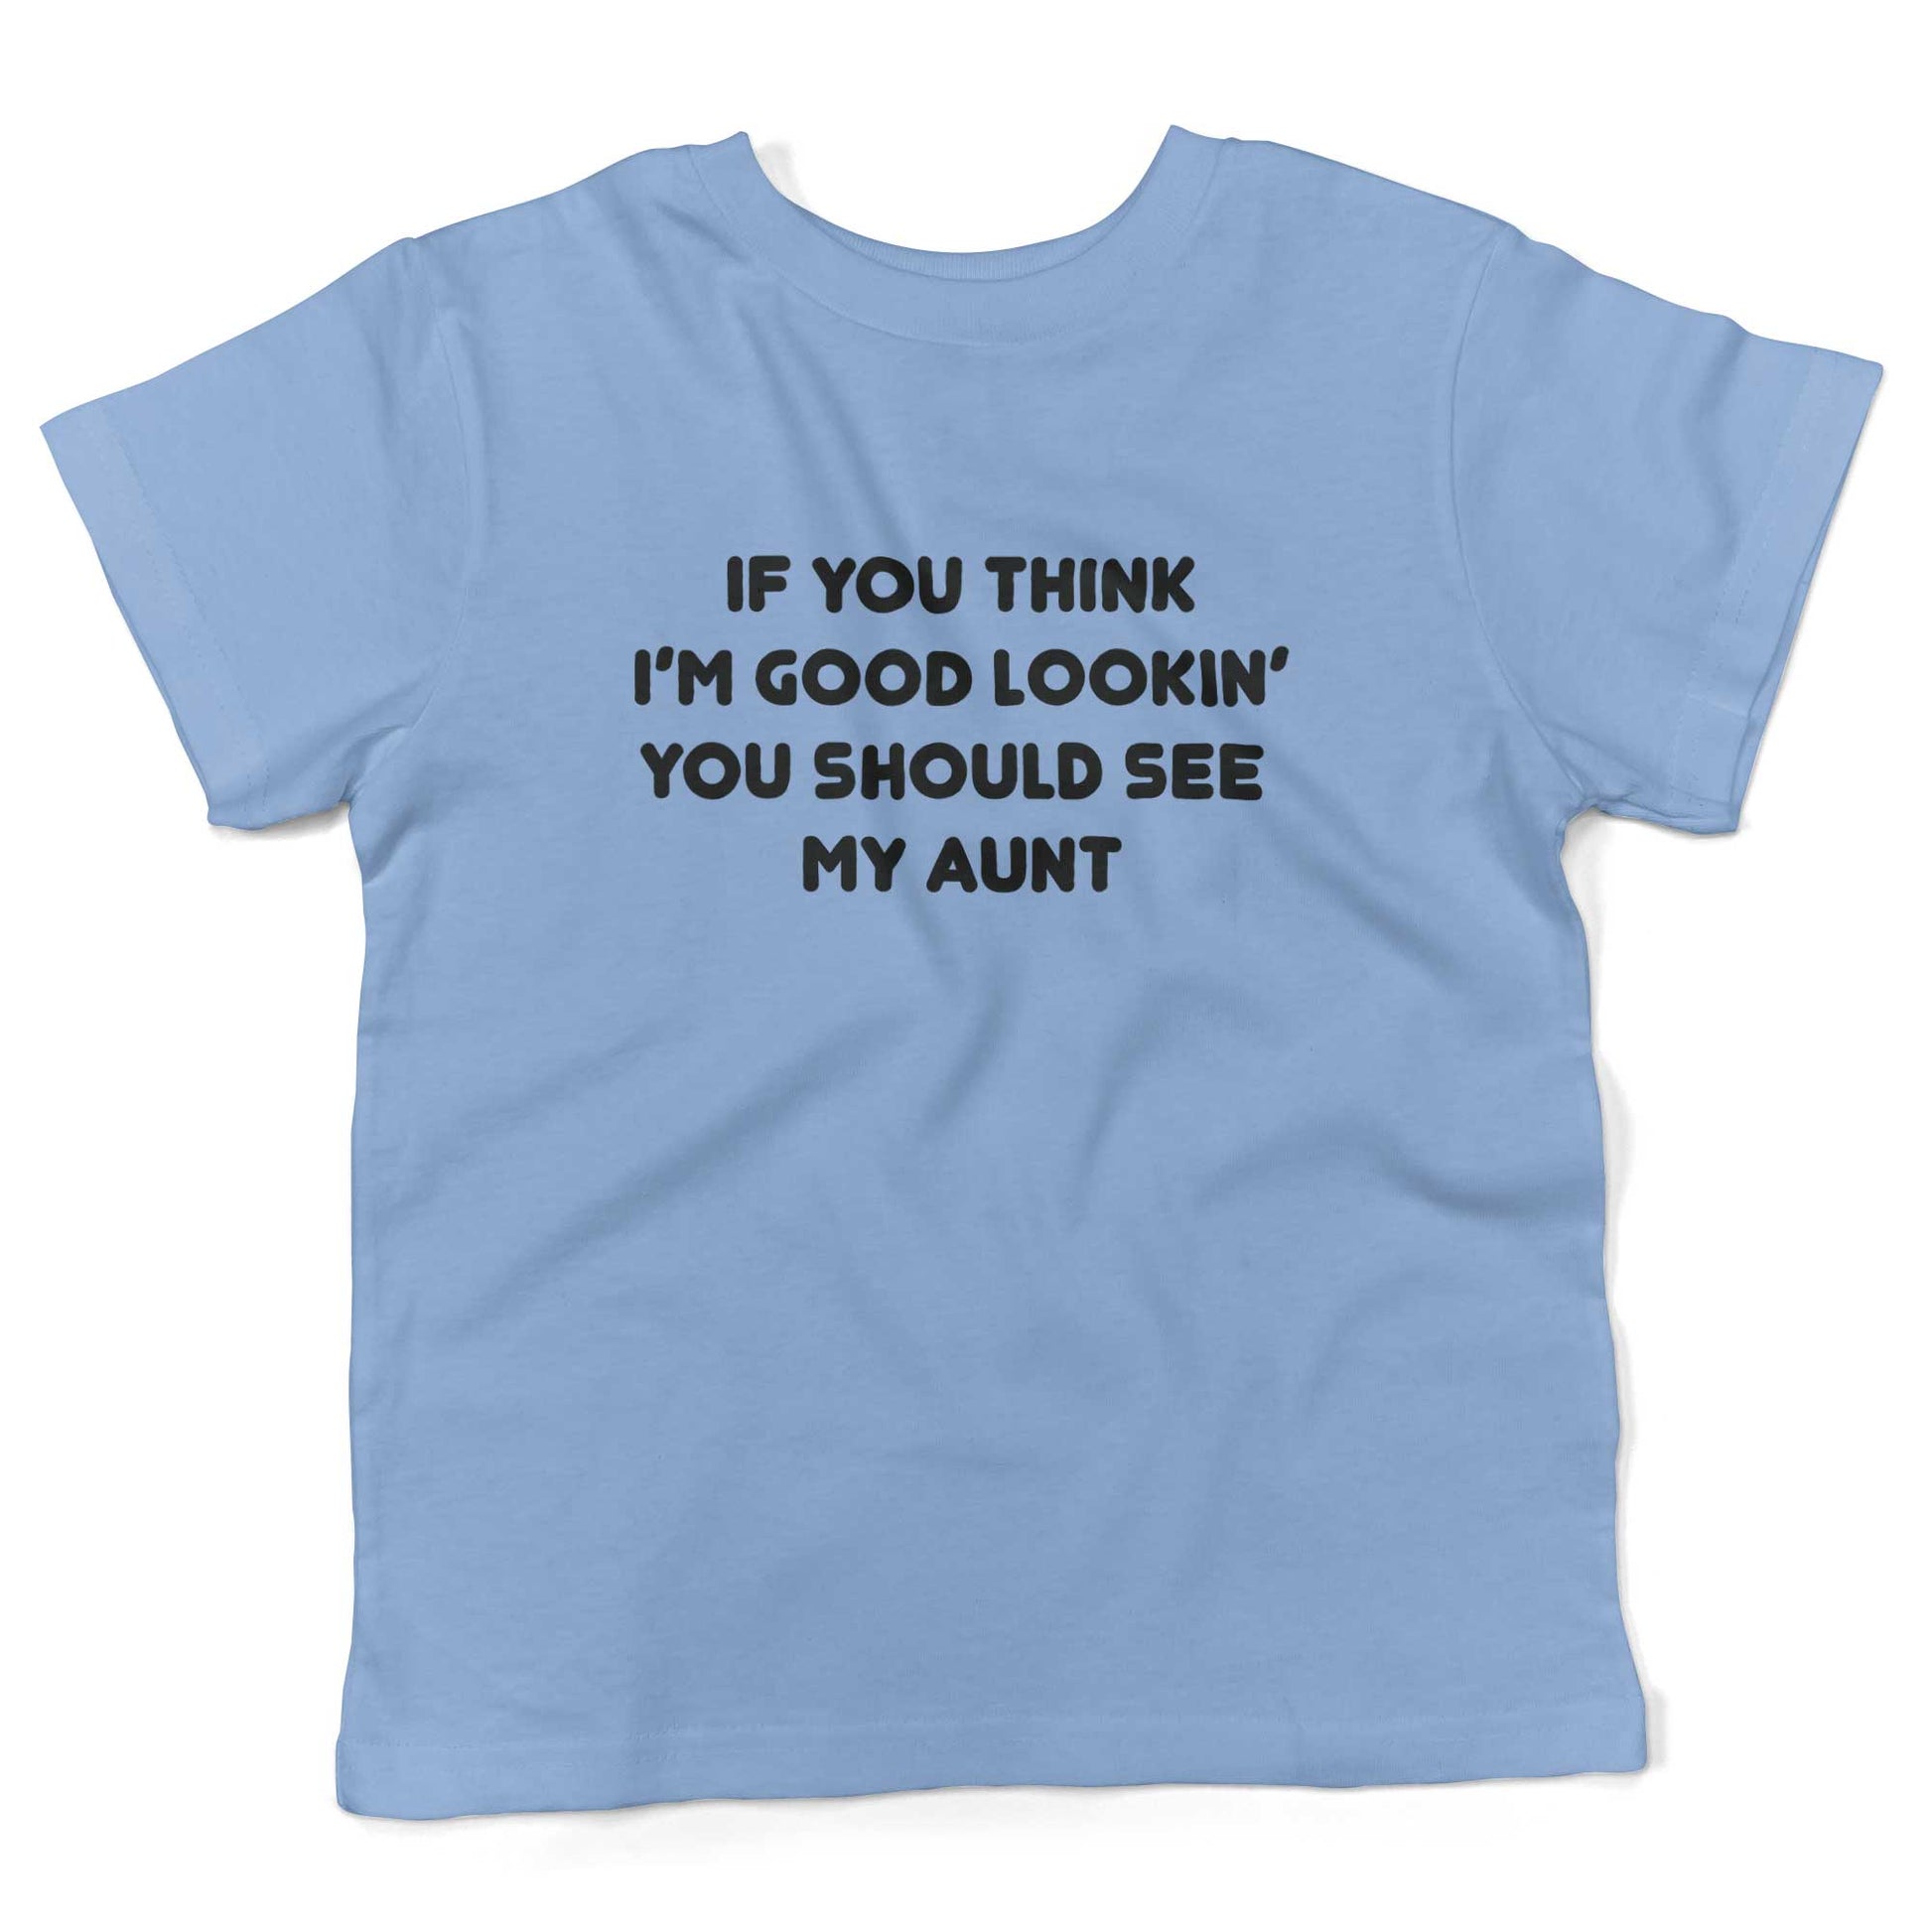 If You Think I'm Good Lookin' You Should See My Aunt Toddler Shirt-Organic Baby Blue-2T